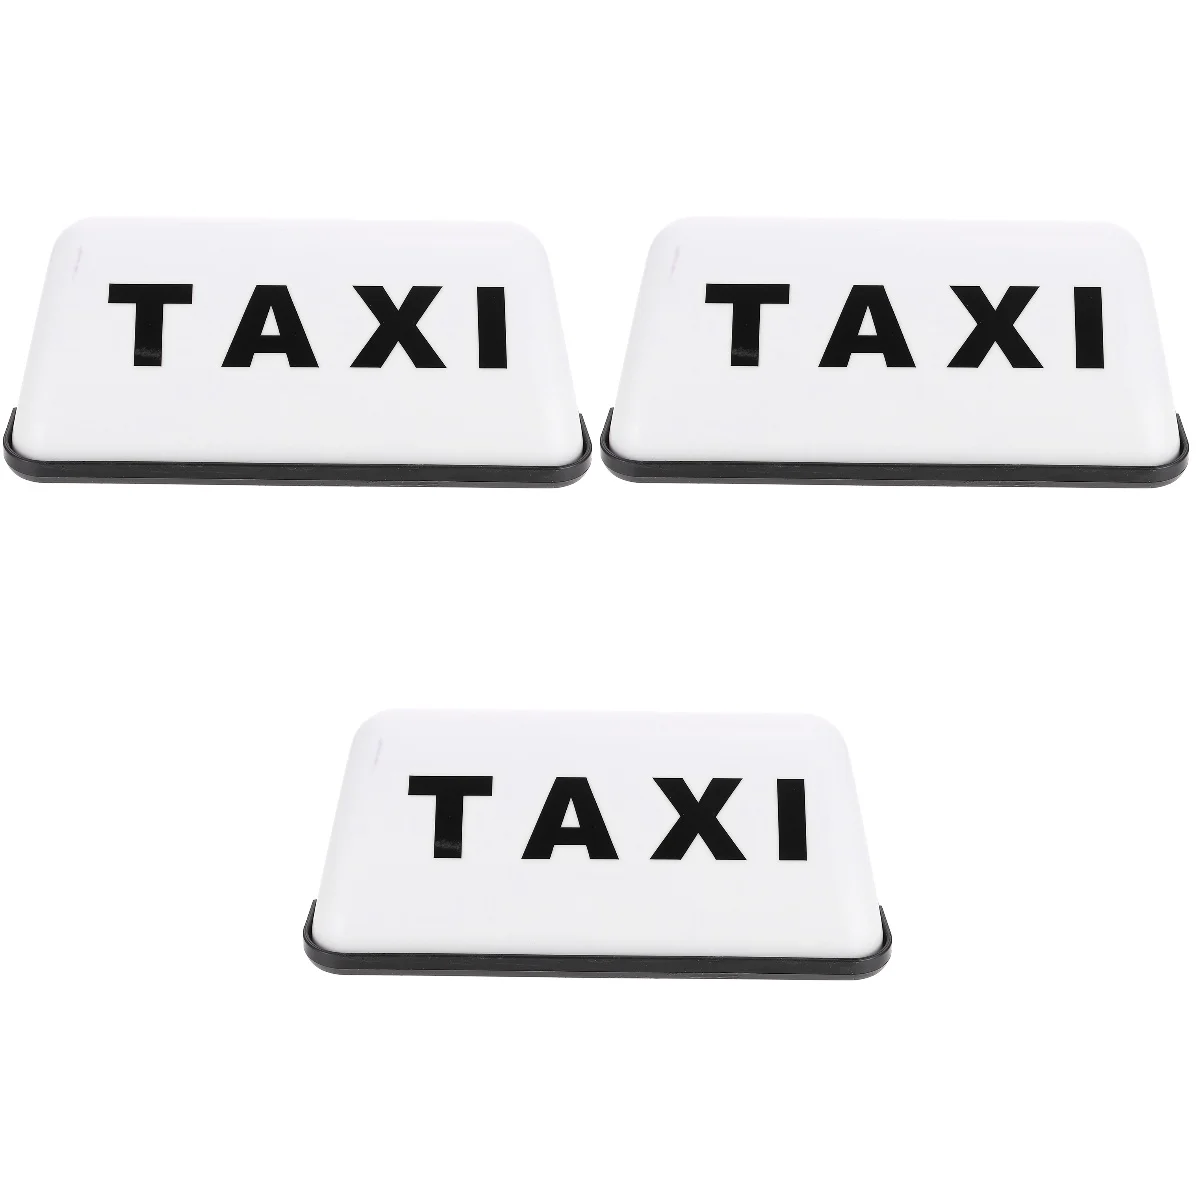 

Taxi Light Sign Led Roof Cab Lightssigns Car Lamptoppers Decorindicatorof Topper Illuminated Night Glowing Dome